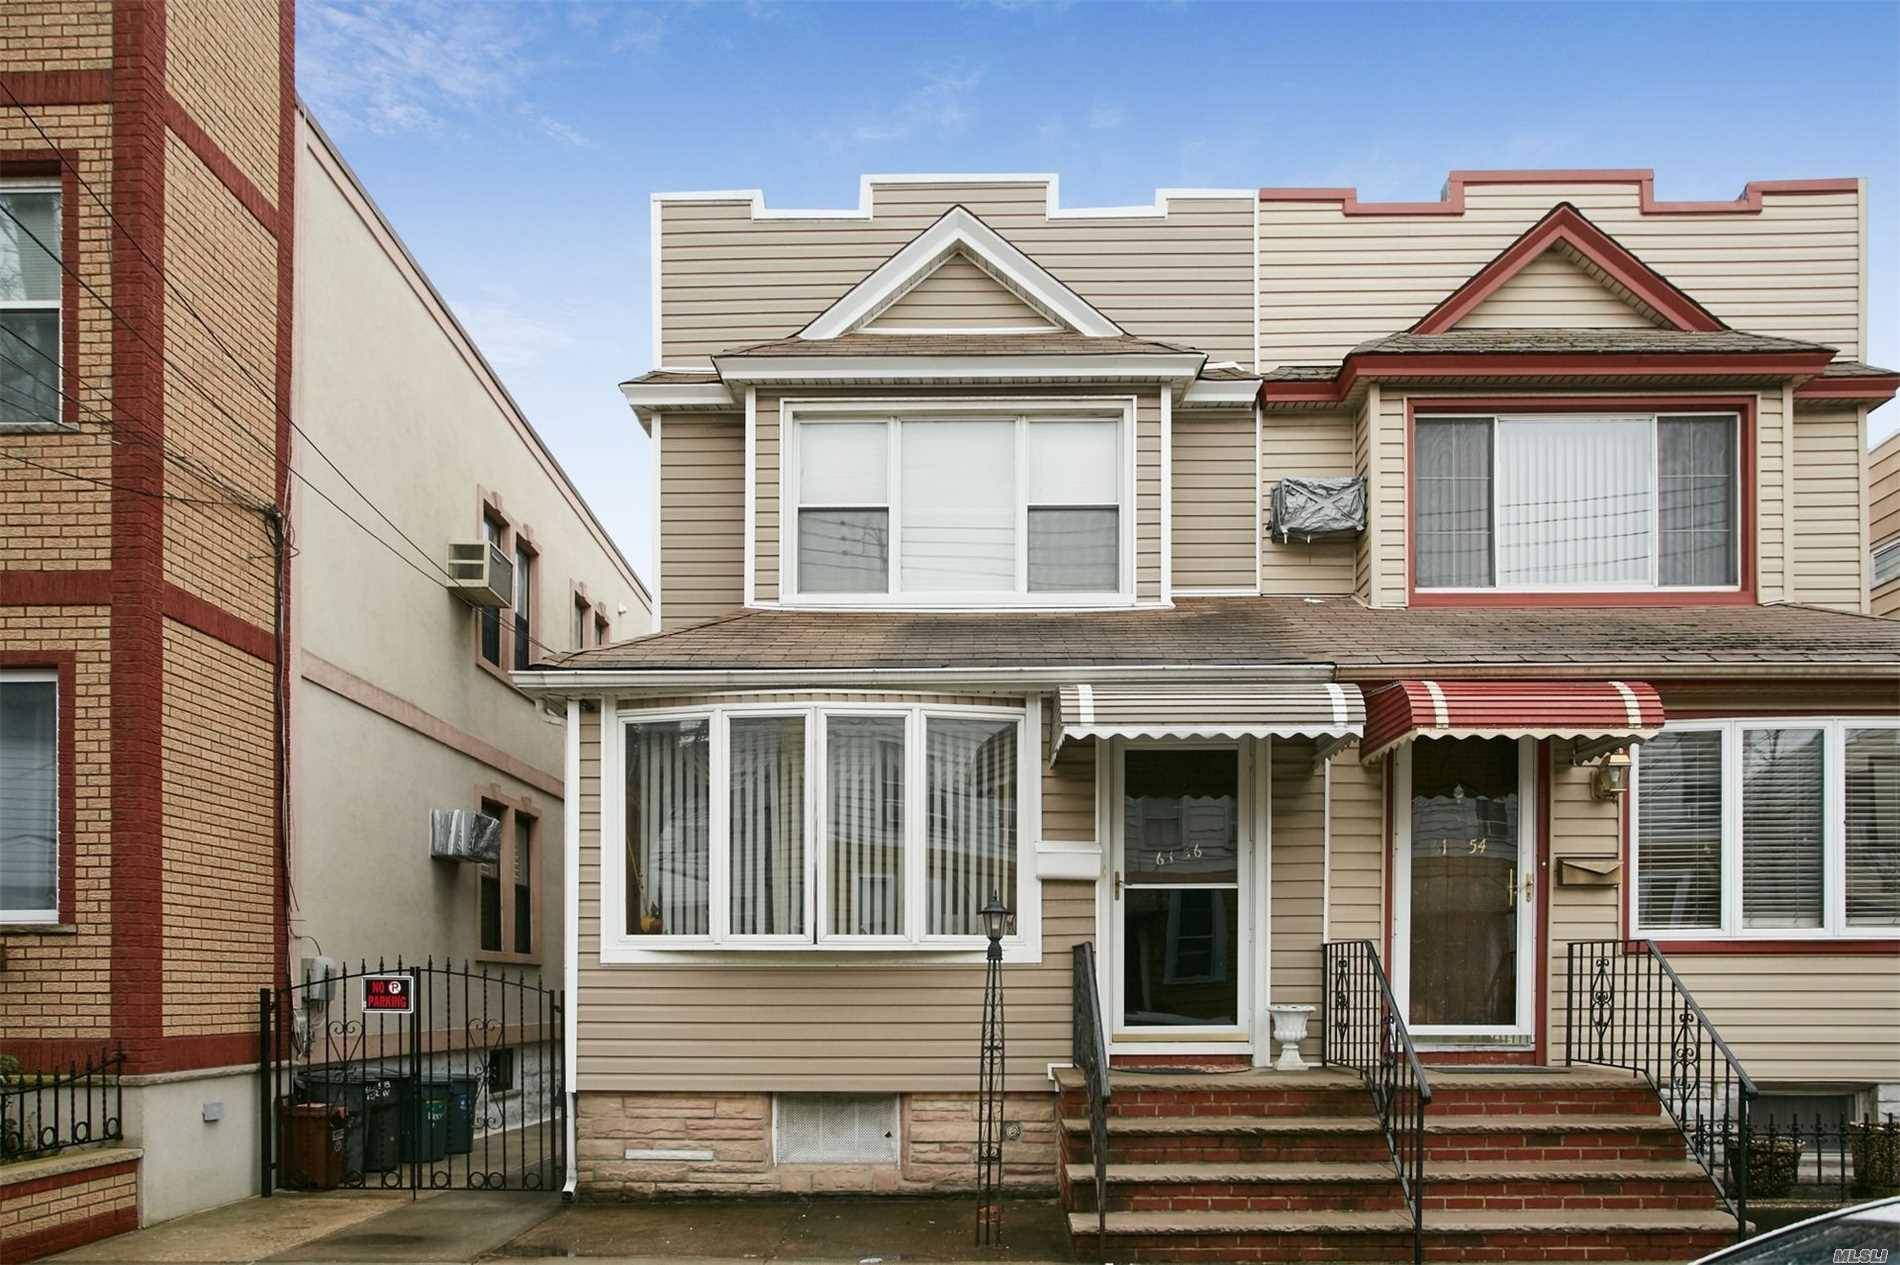 Beautiful Semi Detatched 1 Family, Short Distance To M Train and Shopping, New Stainless Steel Appliances With Granite Counters And Center Island, New Gas Heating only 2 Months Old, 3 ...